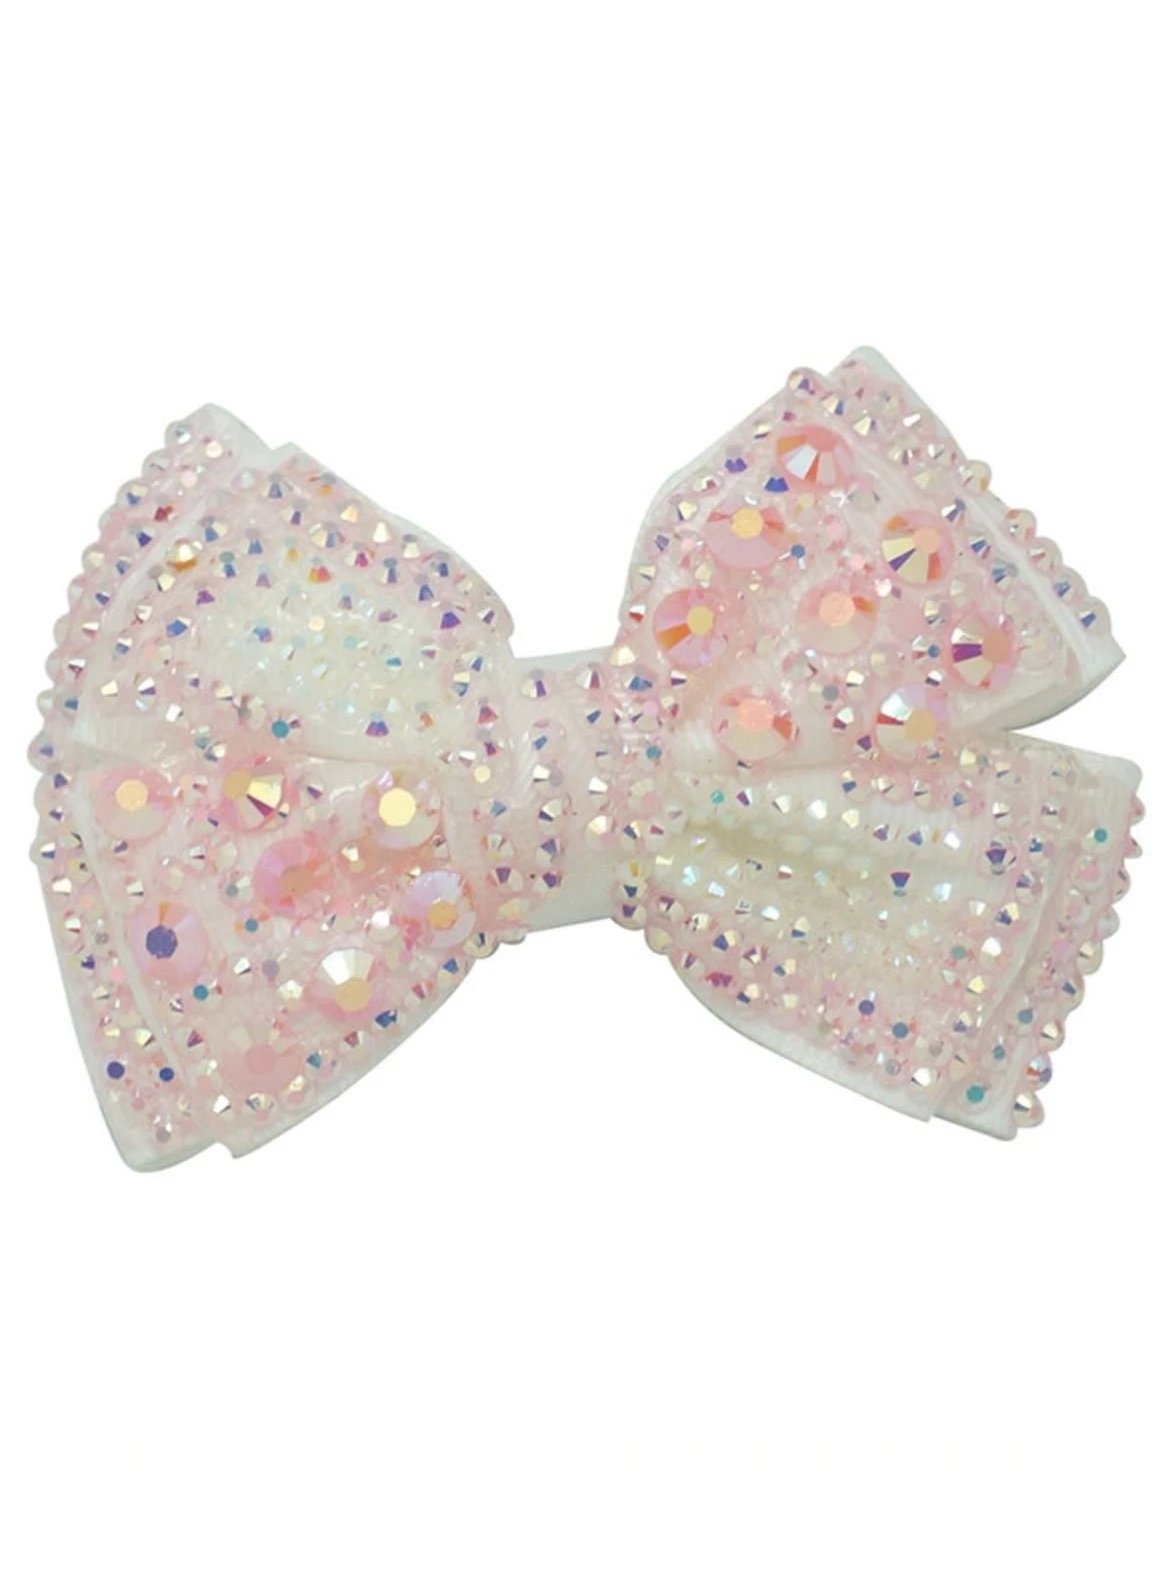 Girls Crystal Rhinestone Embellished Bow Hair Clips - White - Hair Accessories